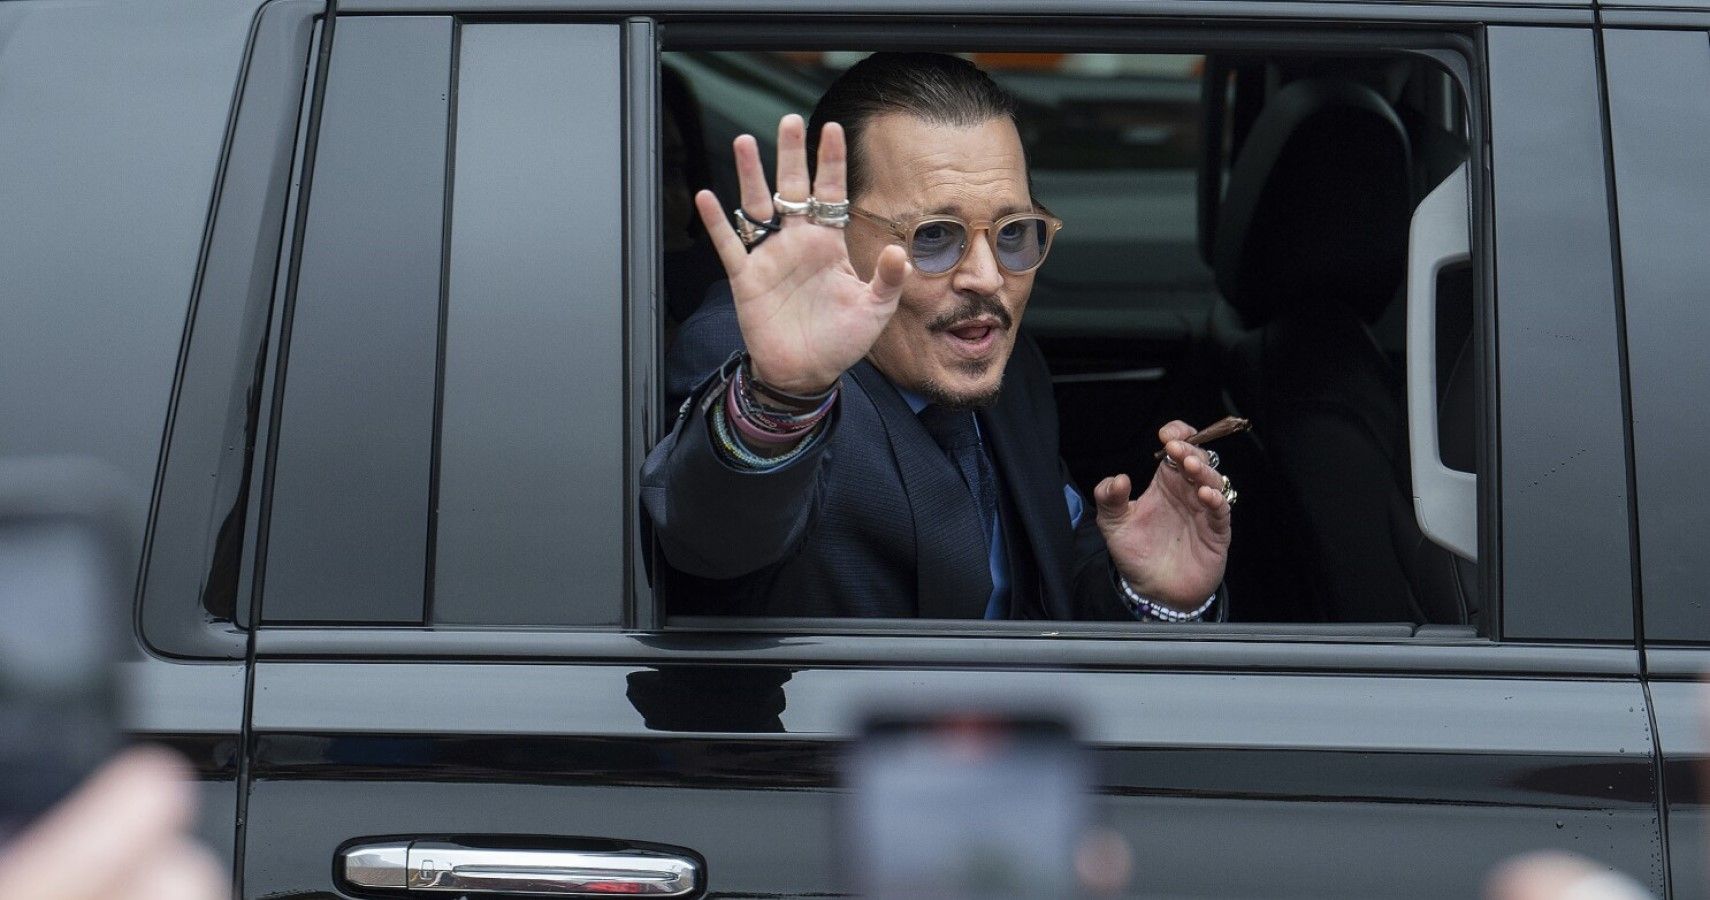 Johnny Depp clicked at his recent court proceedings